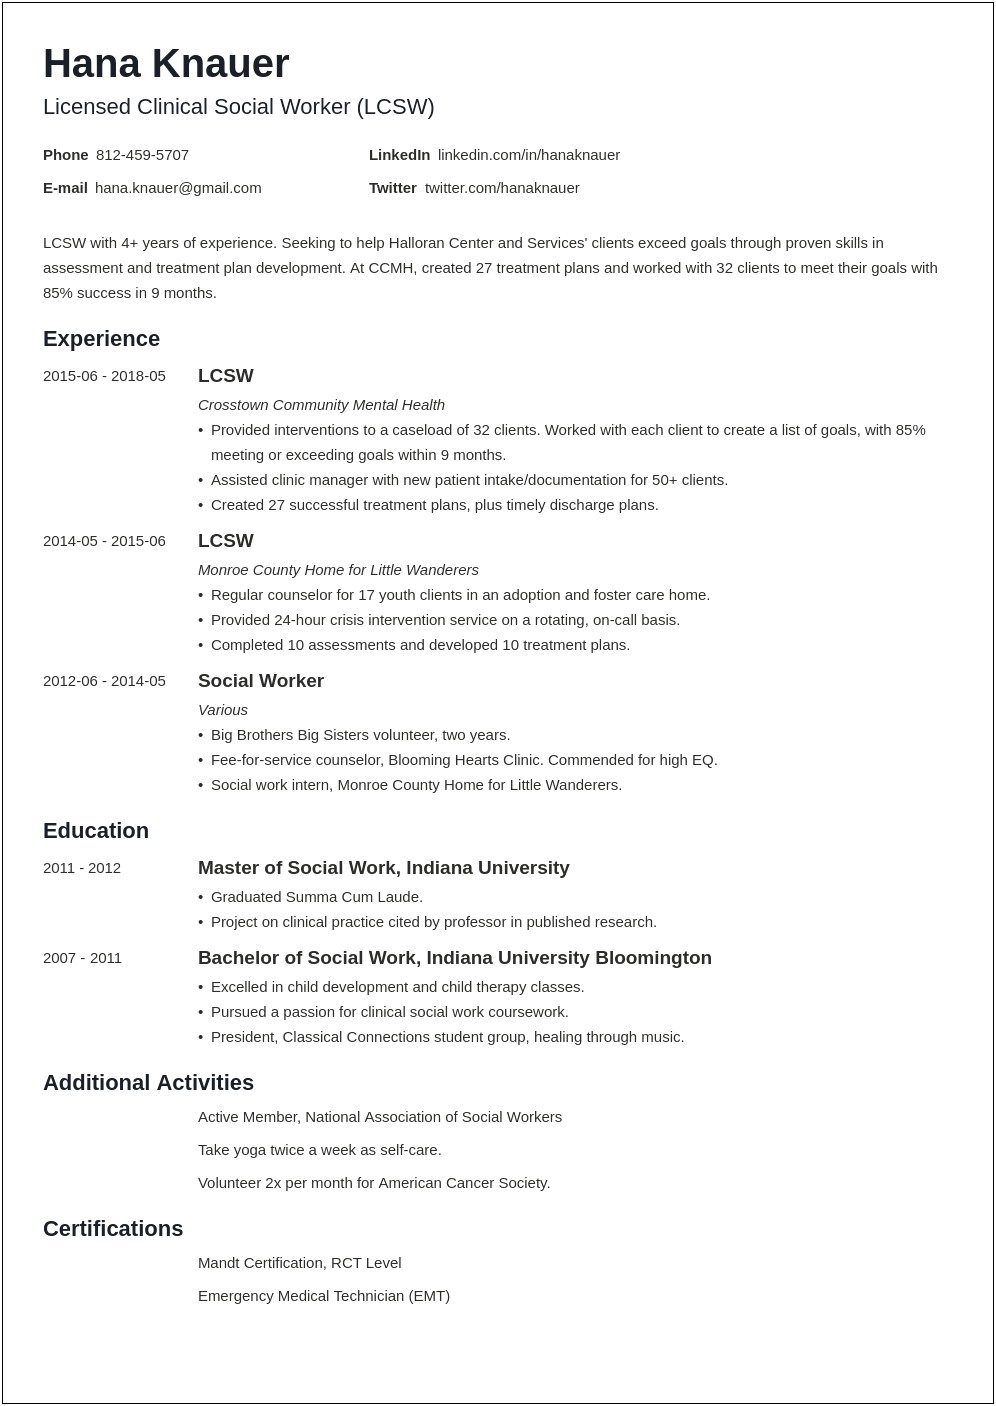 Corporate Social Responsibility Resume Objective